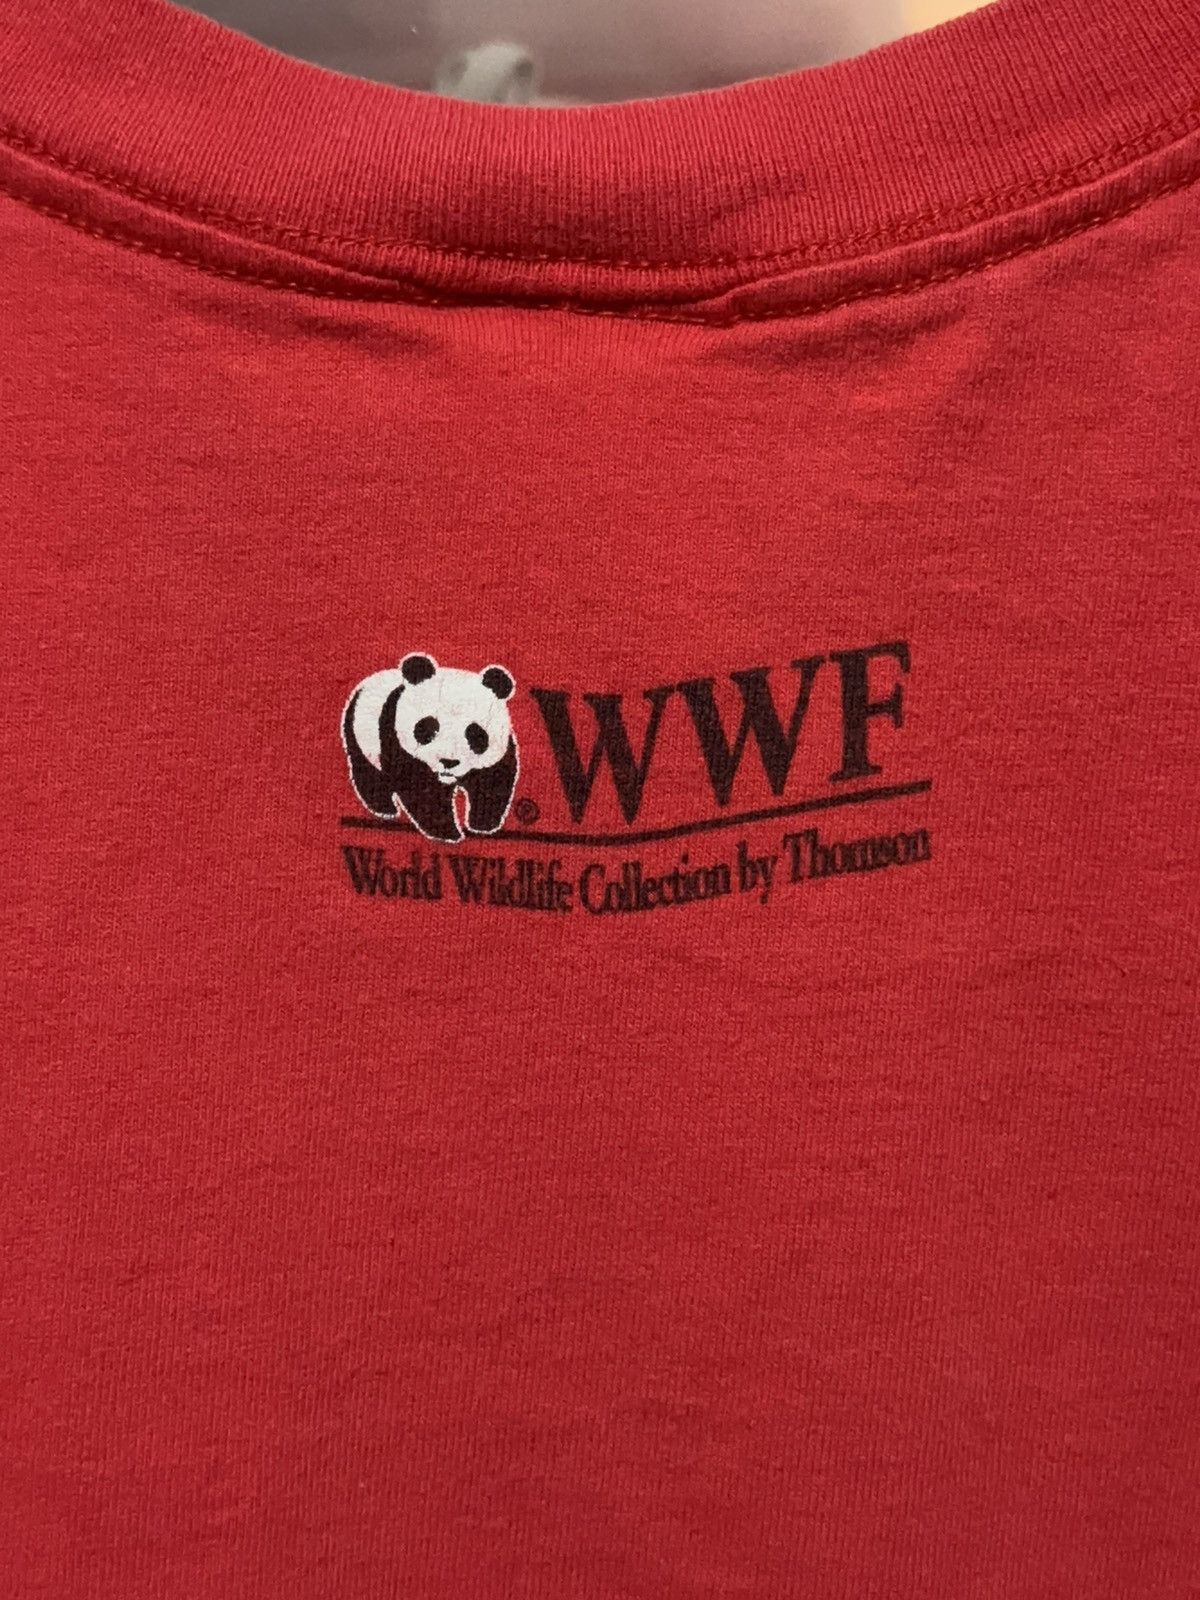 Vintage - The 90s WWF Extinction Is Forever Nature Graphic Tee XL - 4